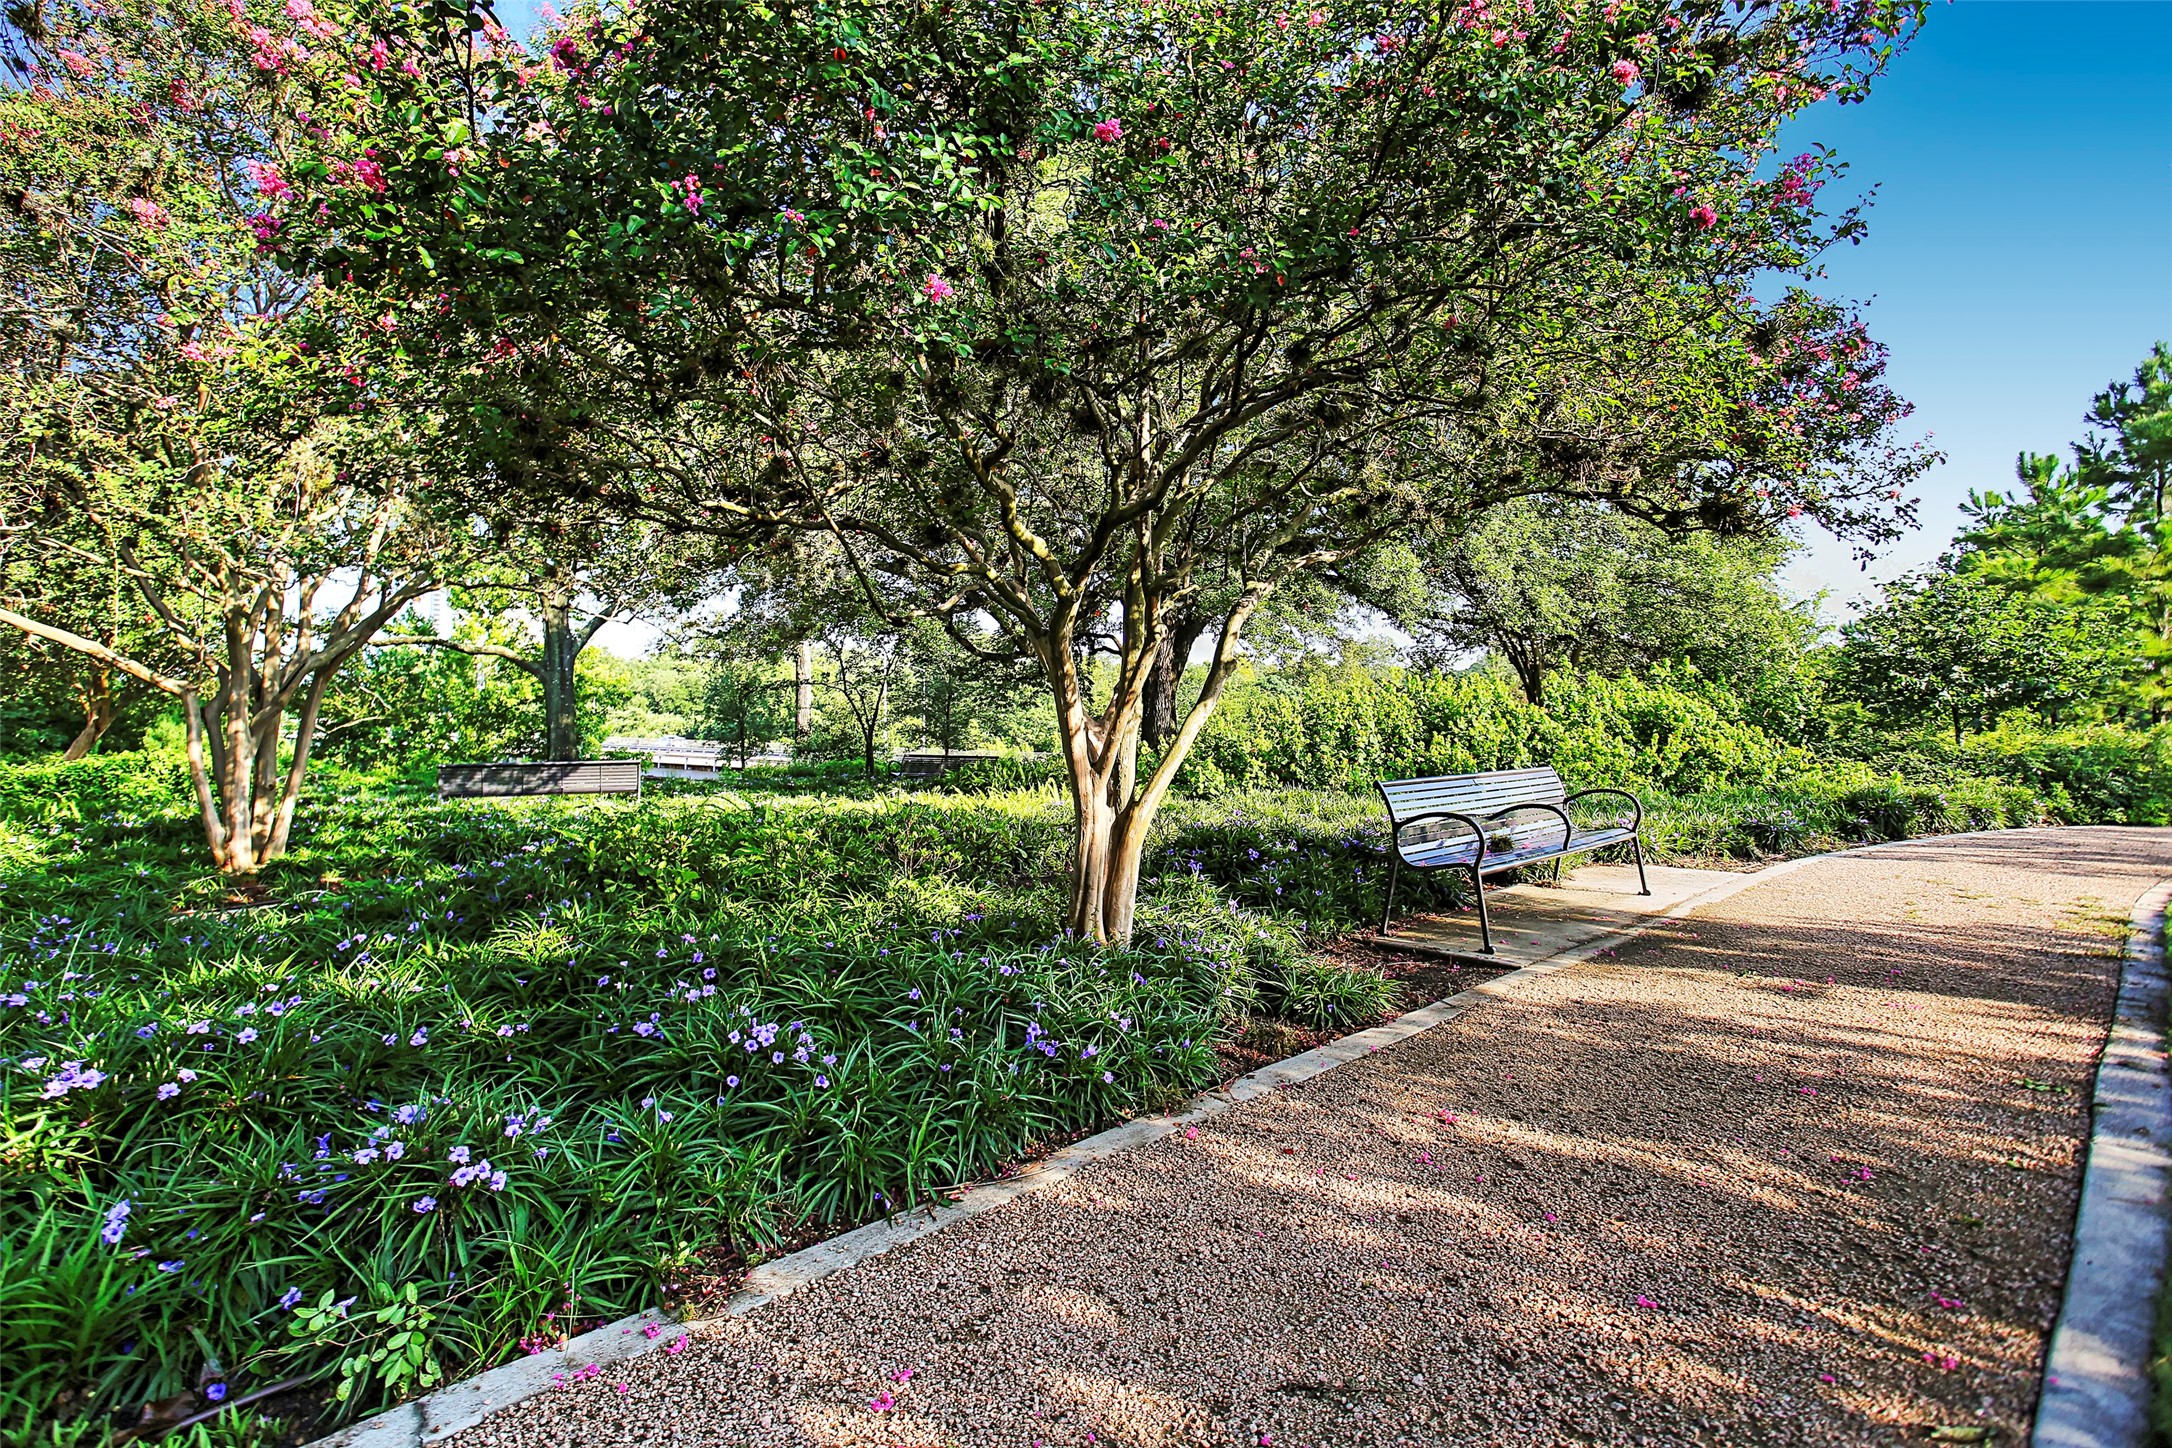 White Oak Station: Located in one of Houston's most desirable neighborhoods. Easy access to all major highways, the community is only minutes from Memorial Park, The Heights, Galleria, Downtown & Washington Corridor & many recreational parks at walking distance.